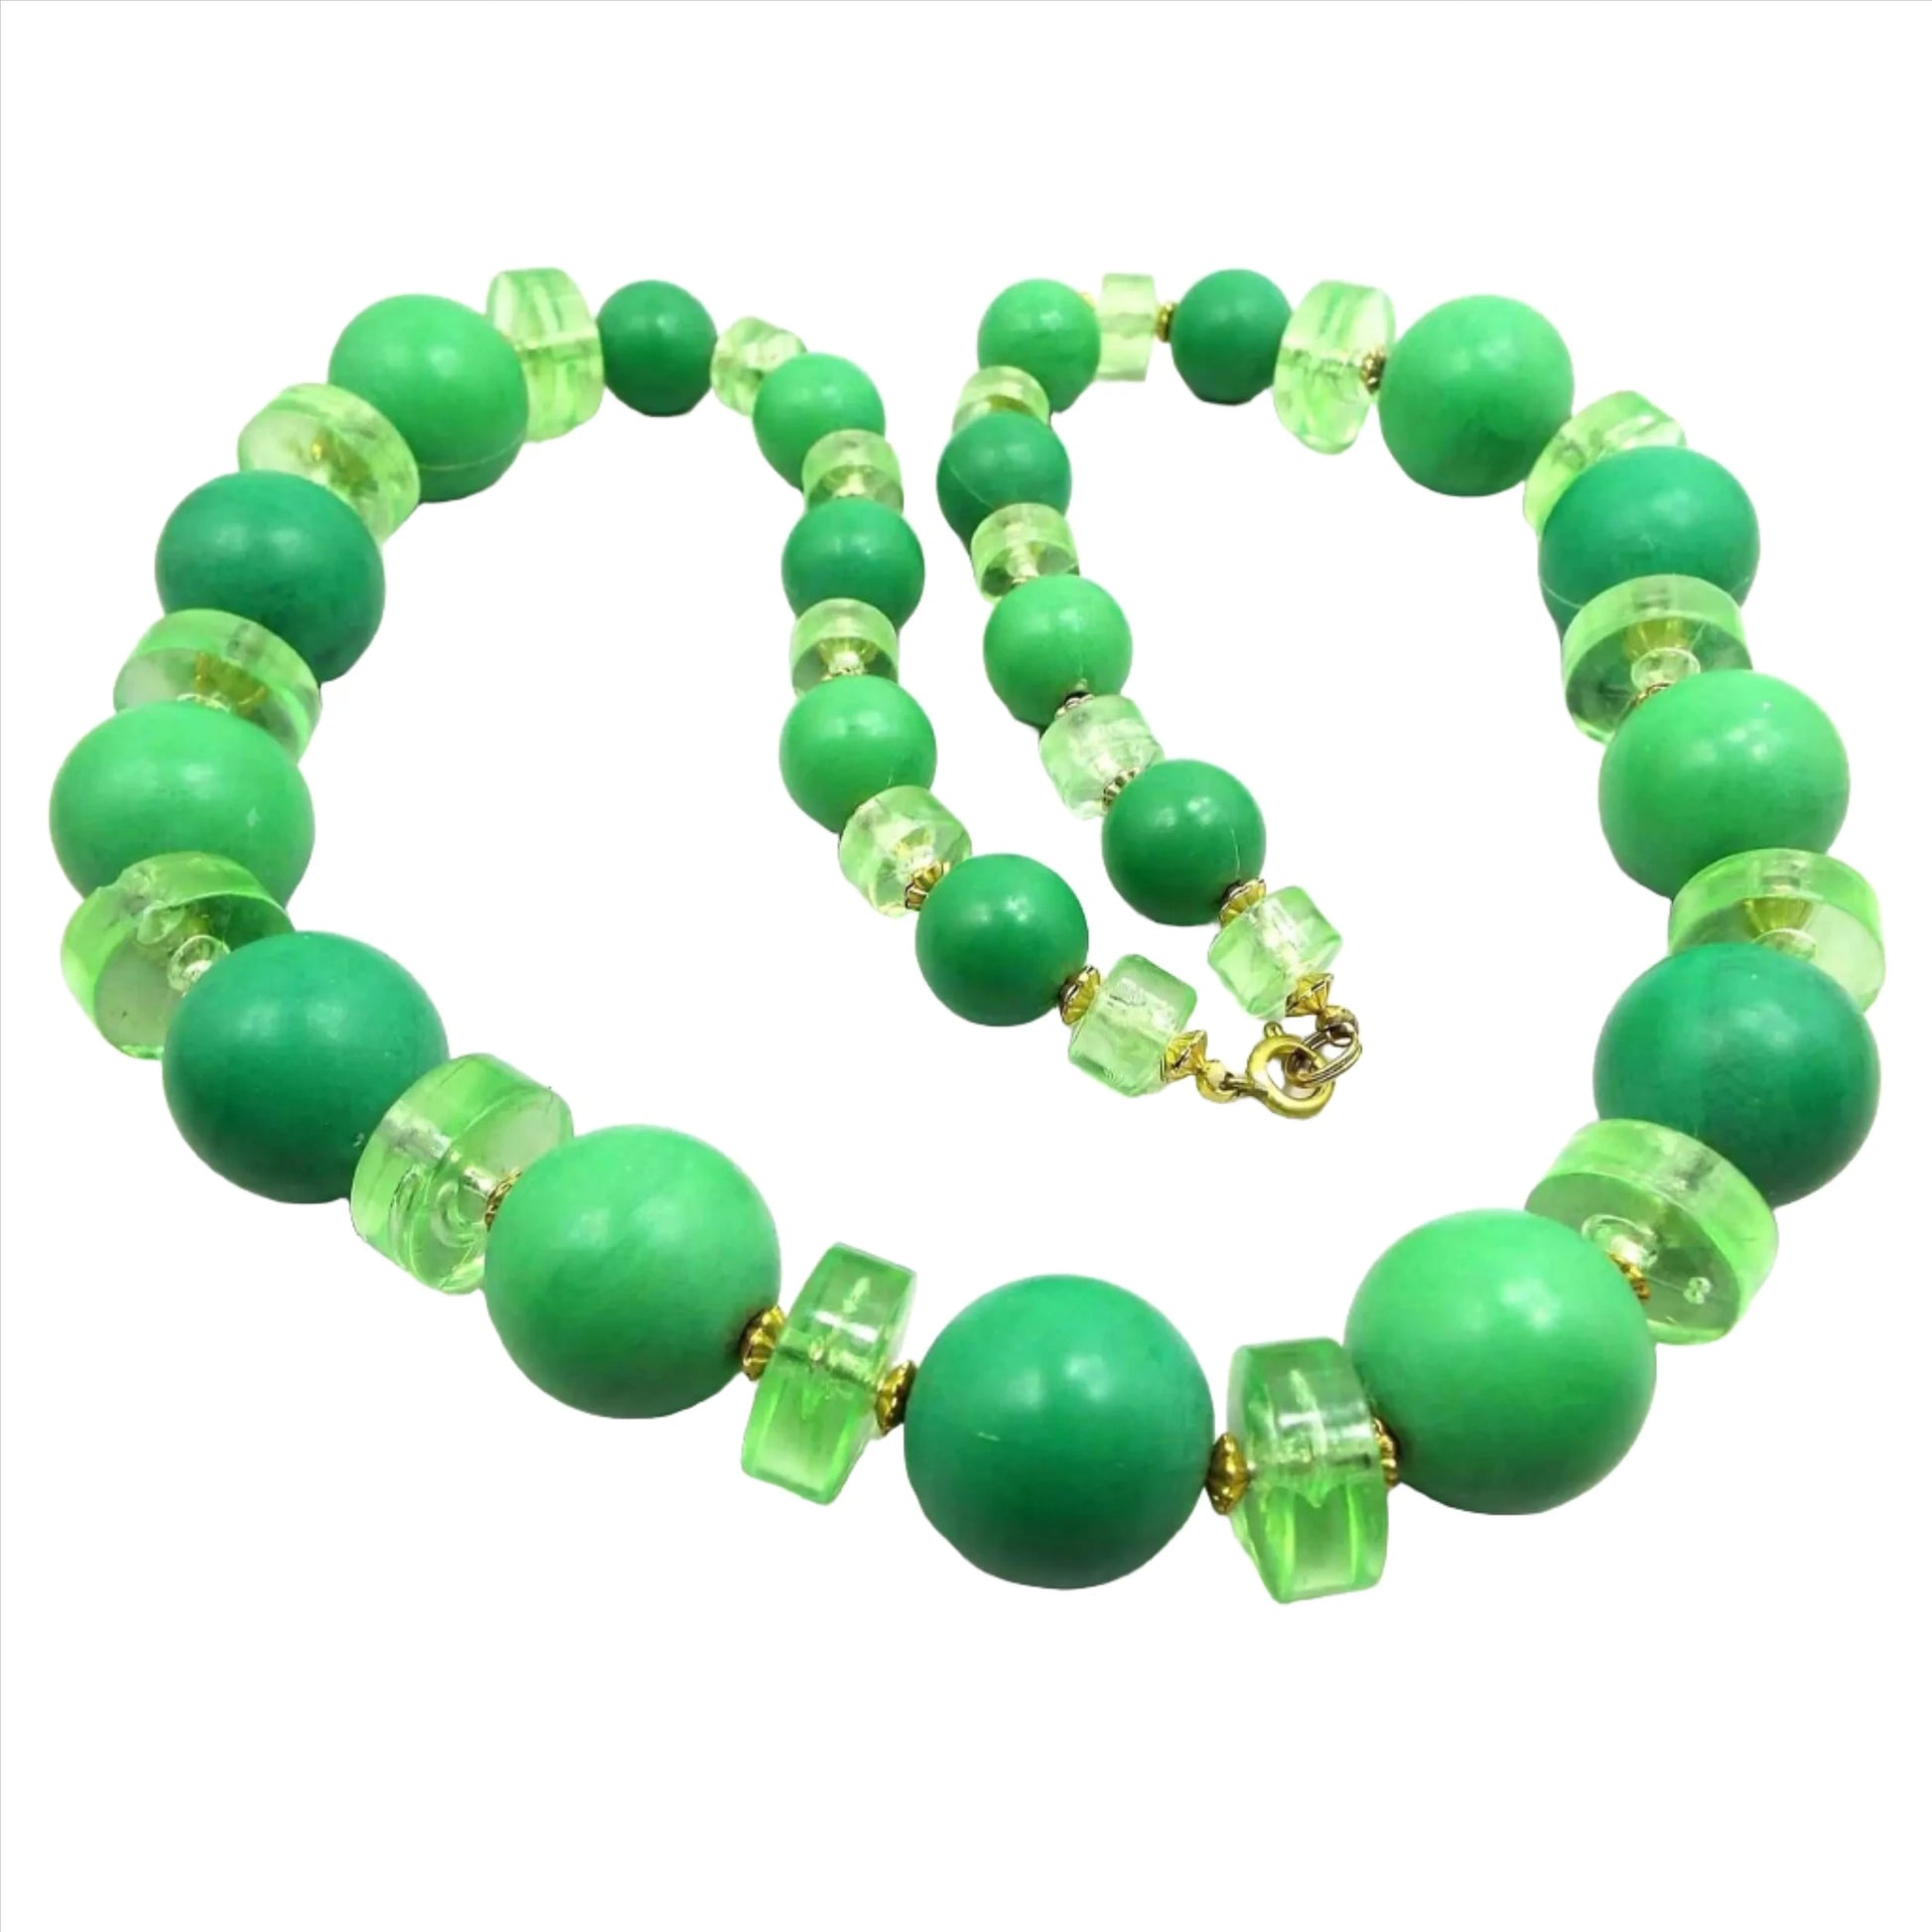 Top view of the Mid Century vintage chunky beaded necklace. It has large round green beads with translucent wide disc beads in between in varying shades of lime green. The metal beads and spring ring clasp are gold tone in color.